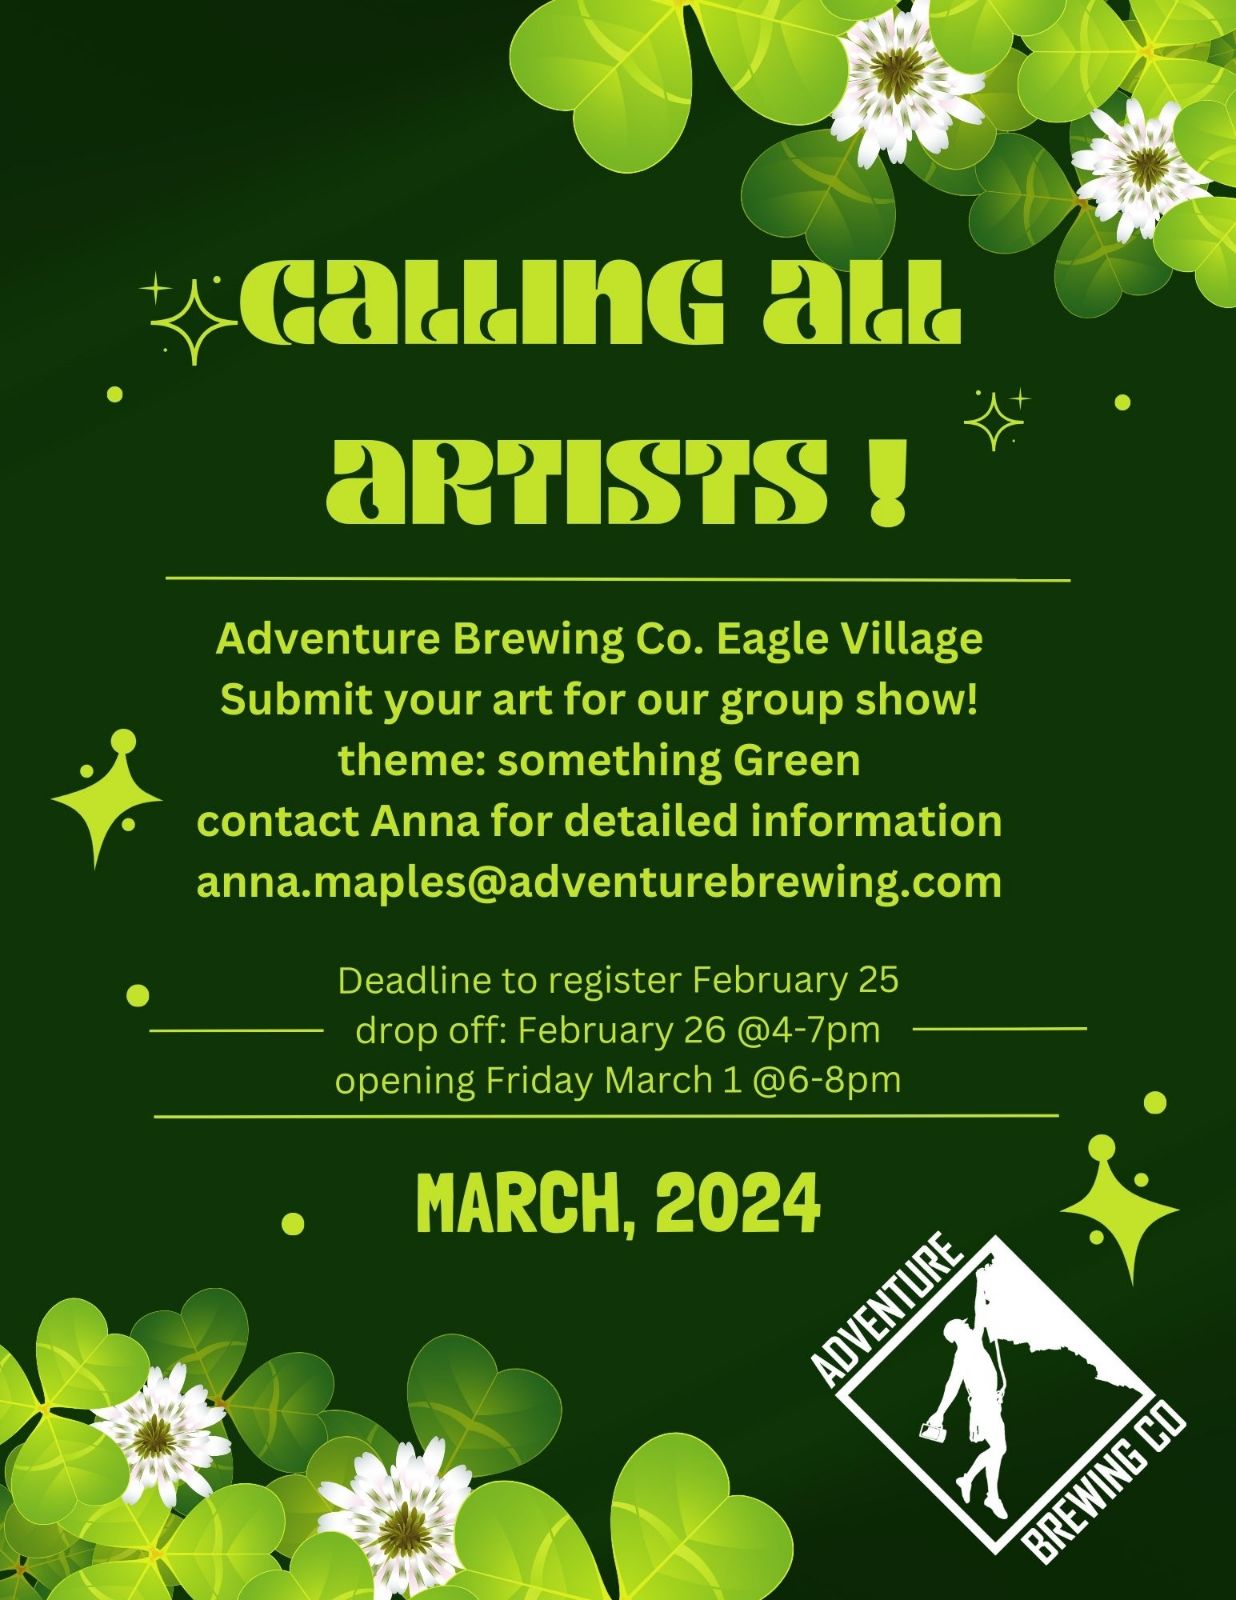 March call for artists